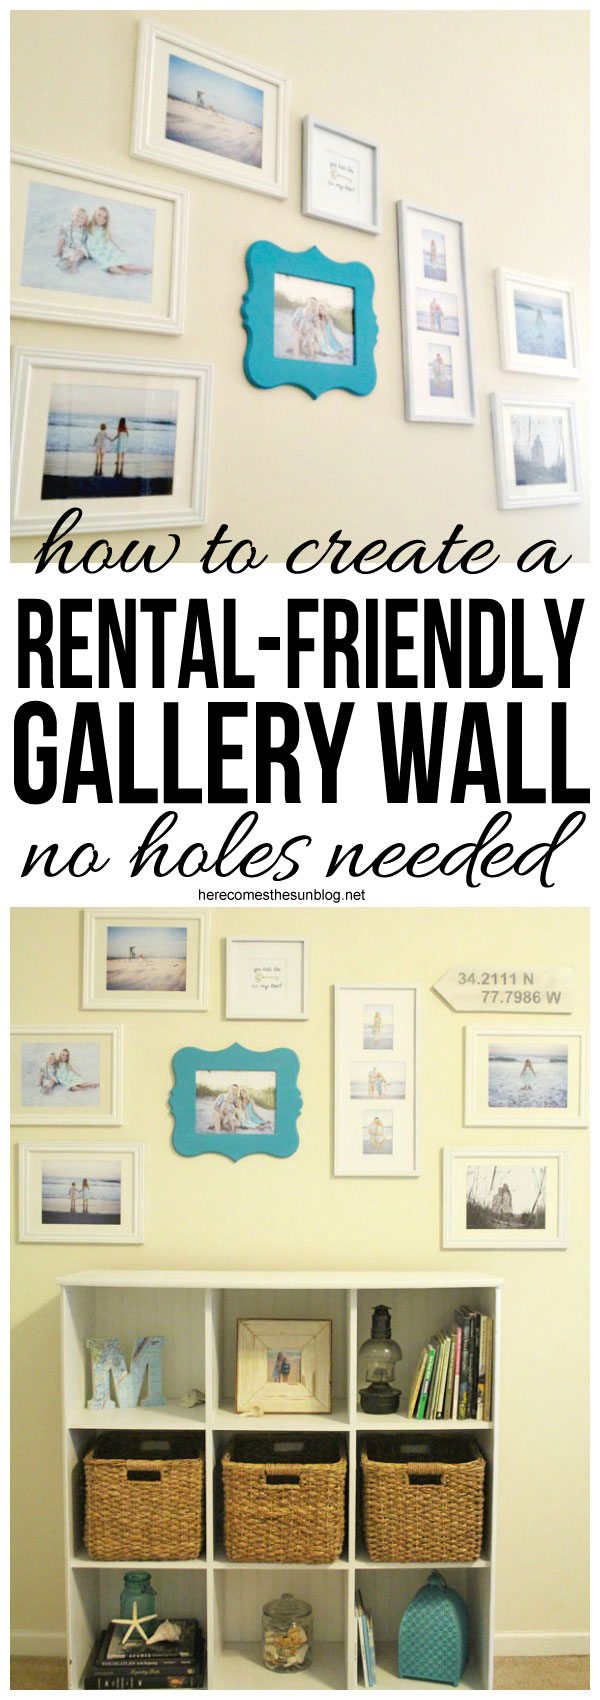 Create a gallery wall easily without doing any damage to your walls! This solution is perfect for renters.